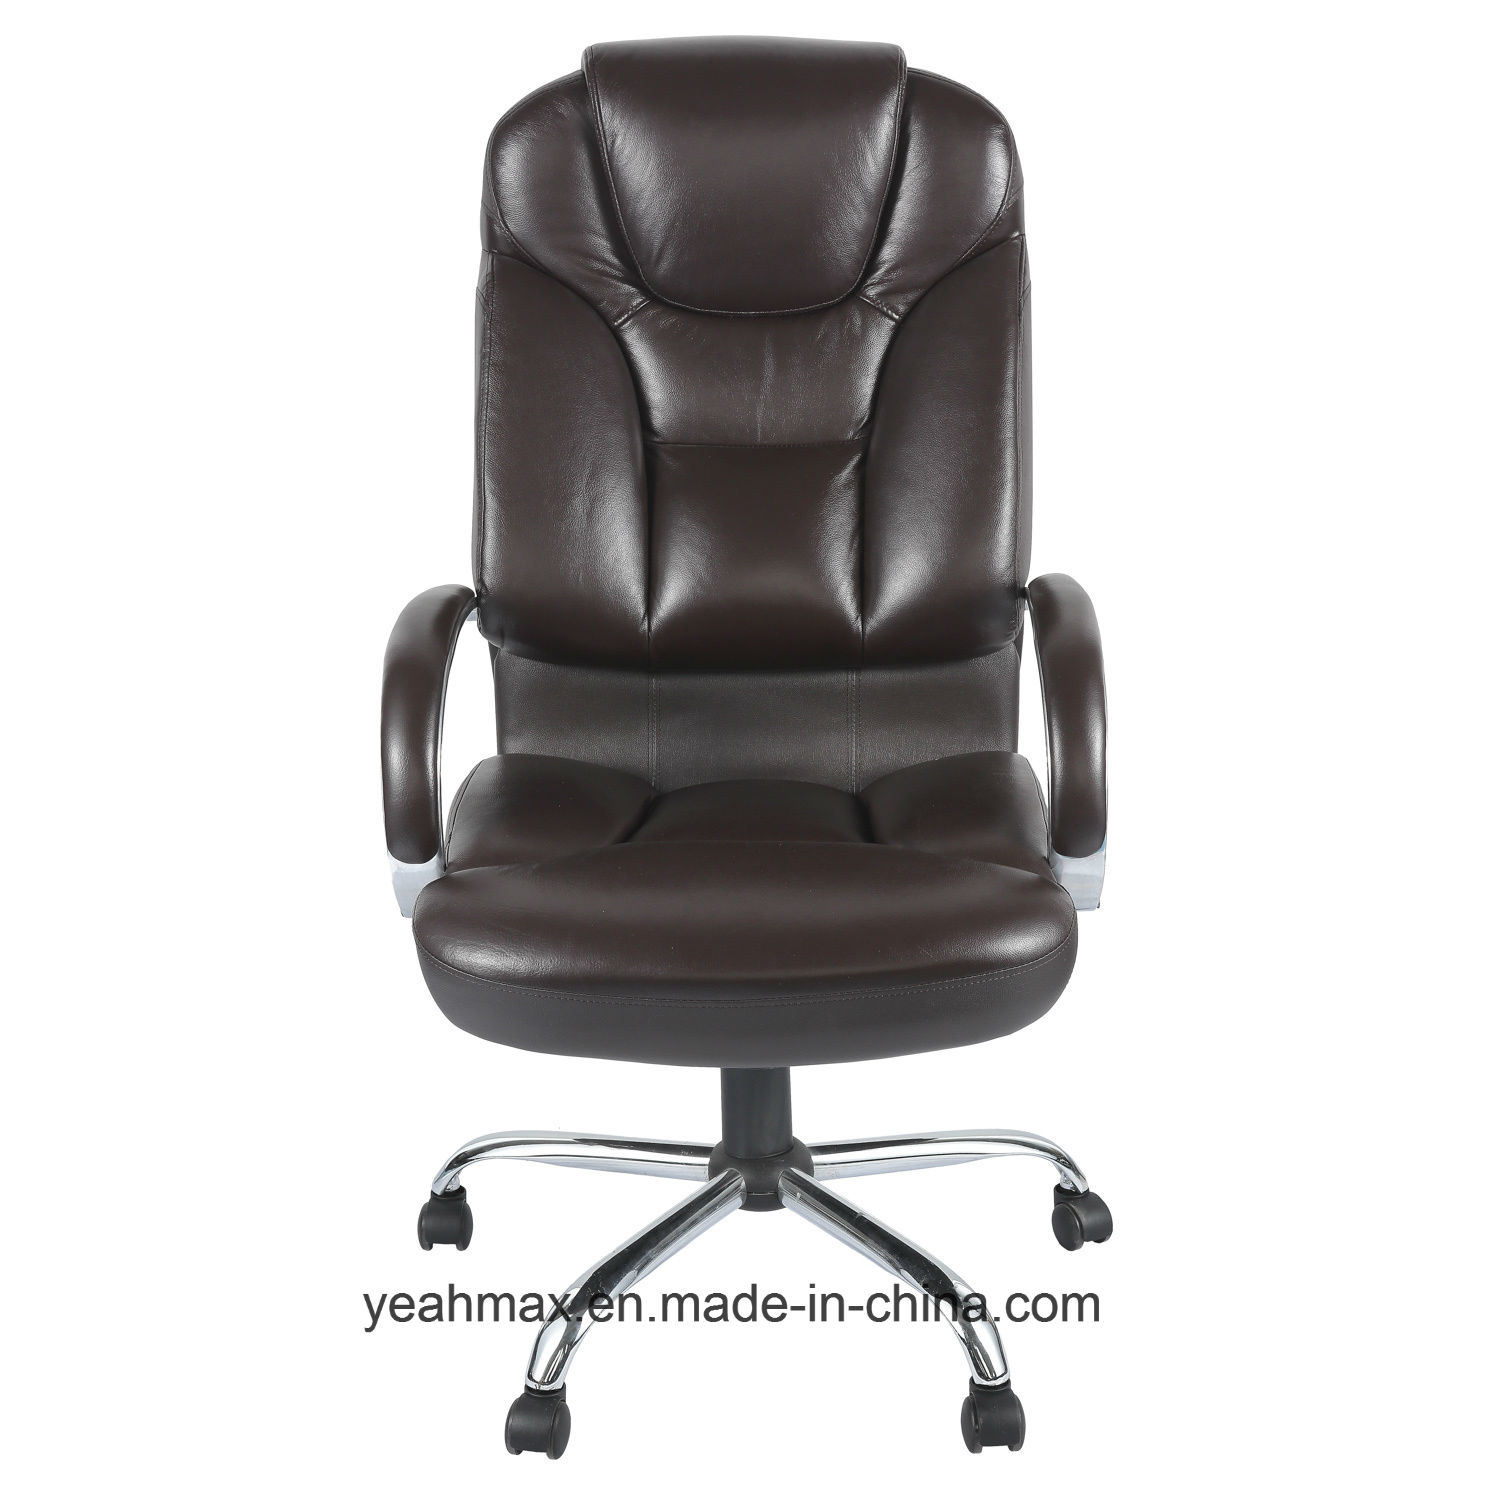 American Office Chair with Leather or PU